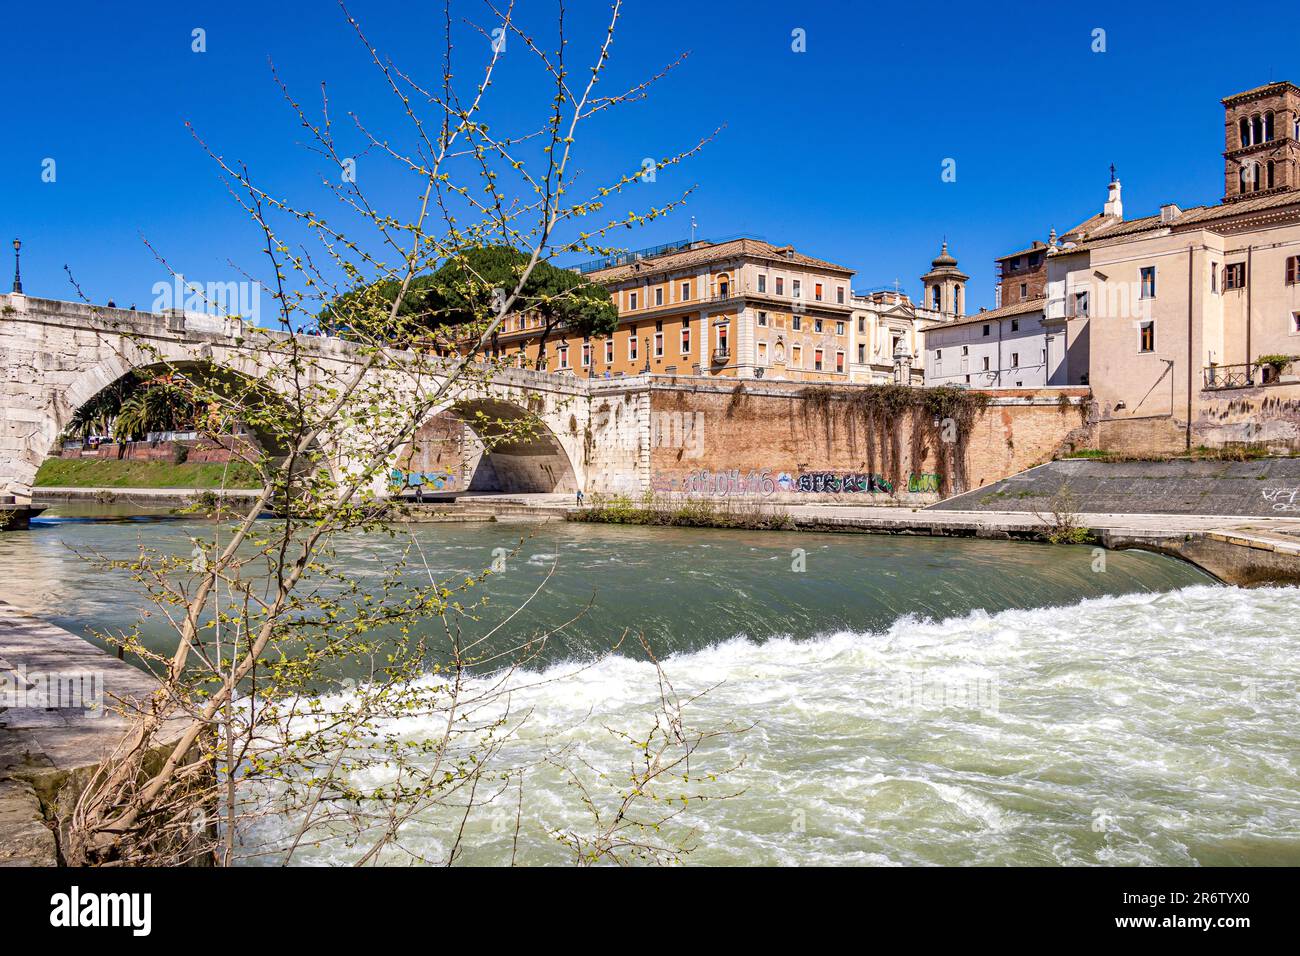 The Ponte Cestio bridge spanning The River Tiber  with Tiber Island in the background, Rome, Italy Stock Photo